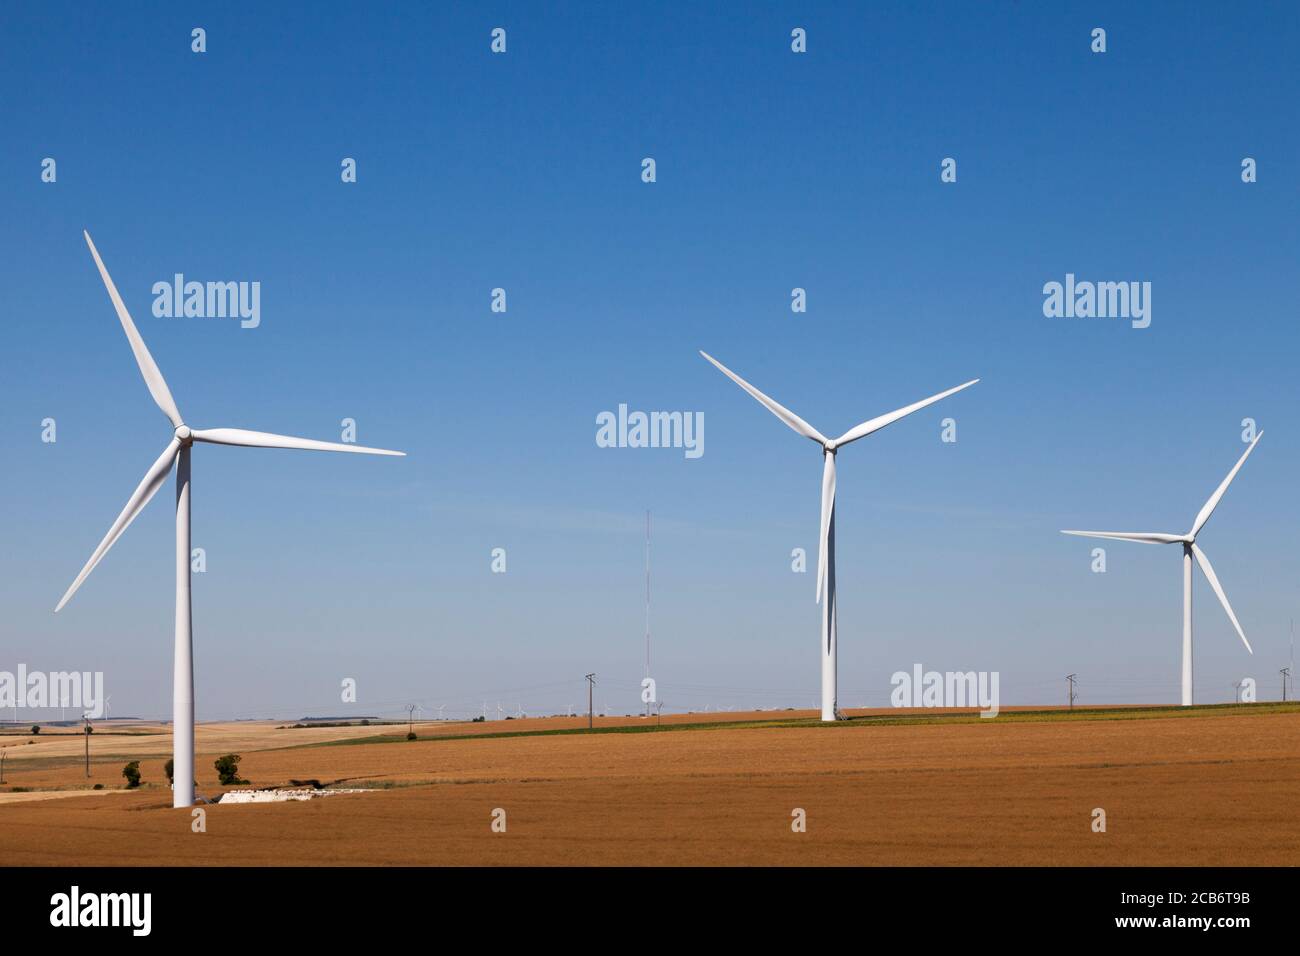 Wind turbines in the middle of a wheat field. Stock Photo